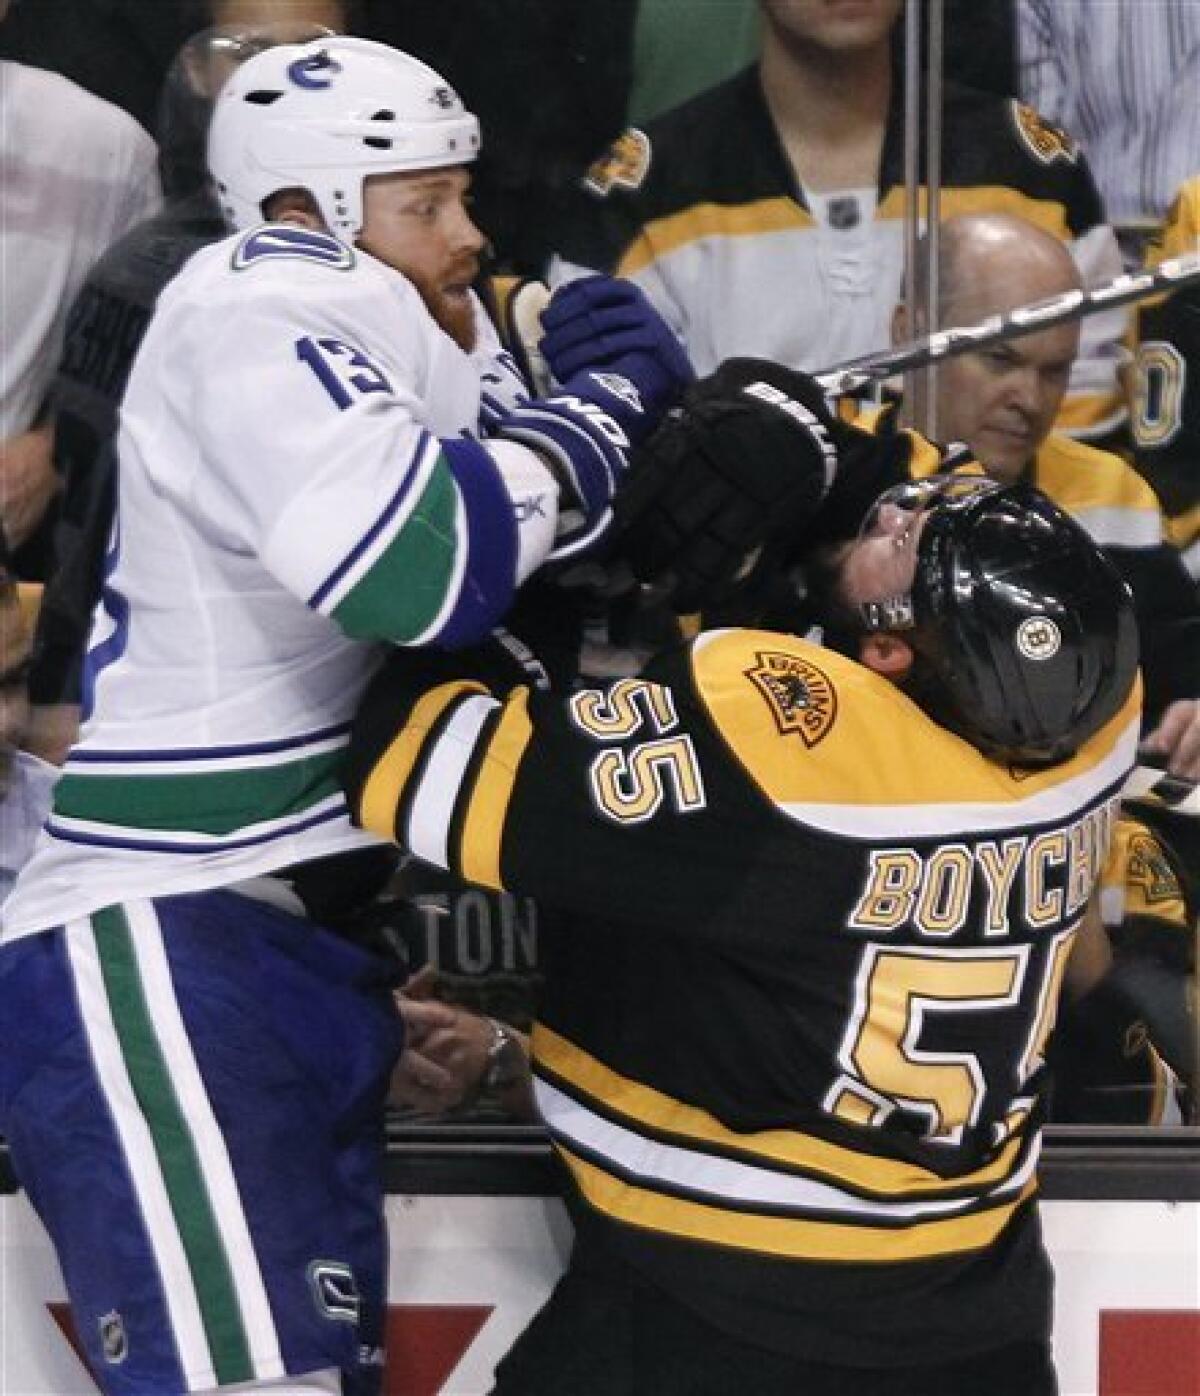 Hockey Hit: Brad Marchand Stanley Cup Cheap Shot 